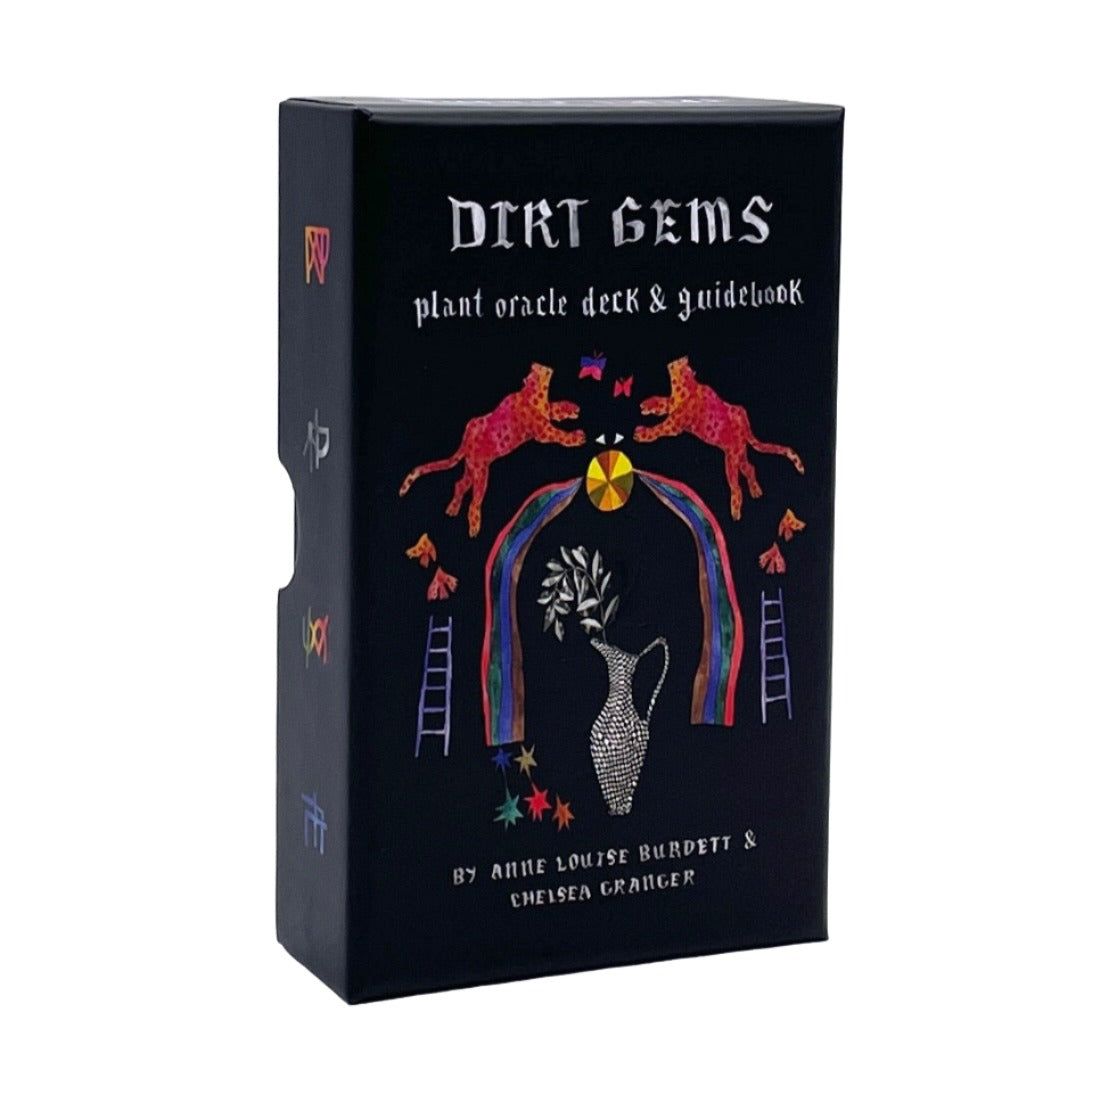 Dirt Gems box, black with white text and a bright hand drawn image in the center.